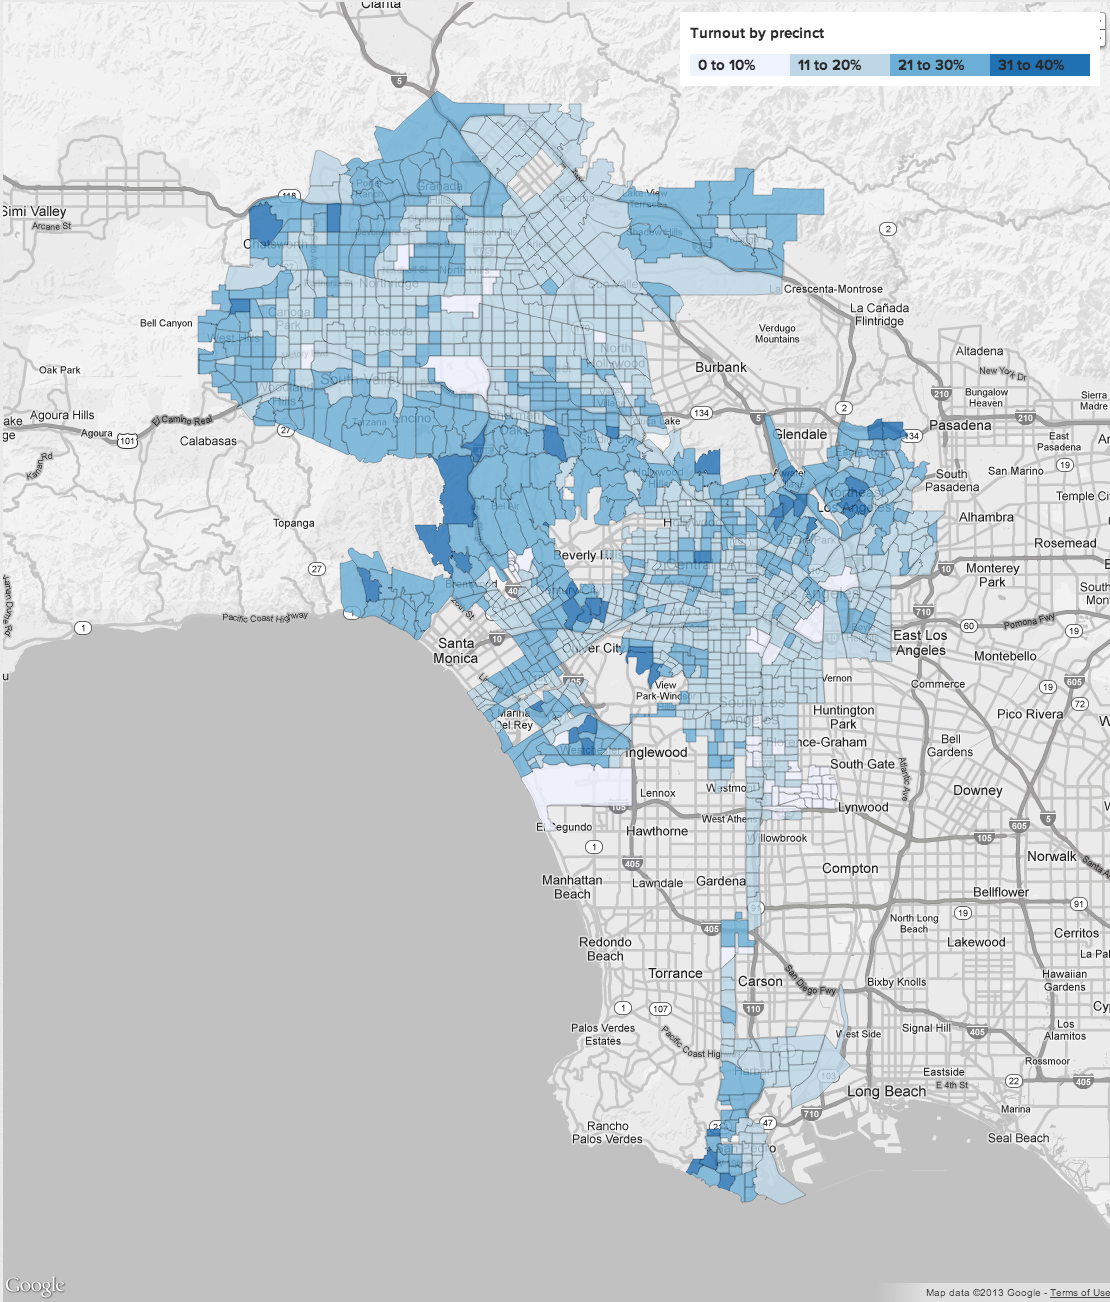 2013 L.A. Mayor voting turnout by precinct